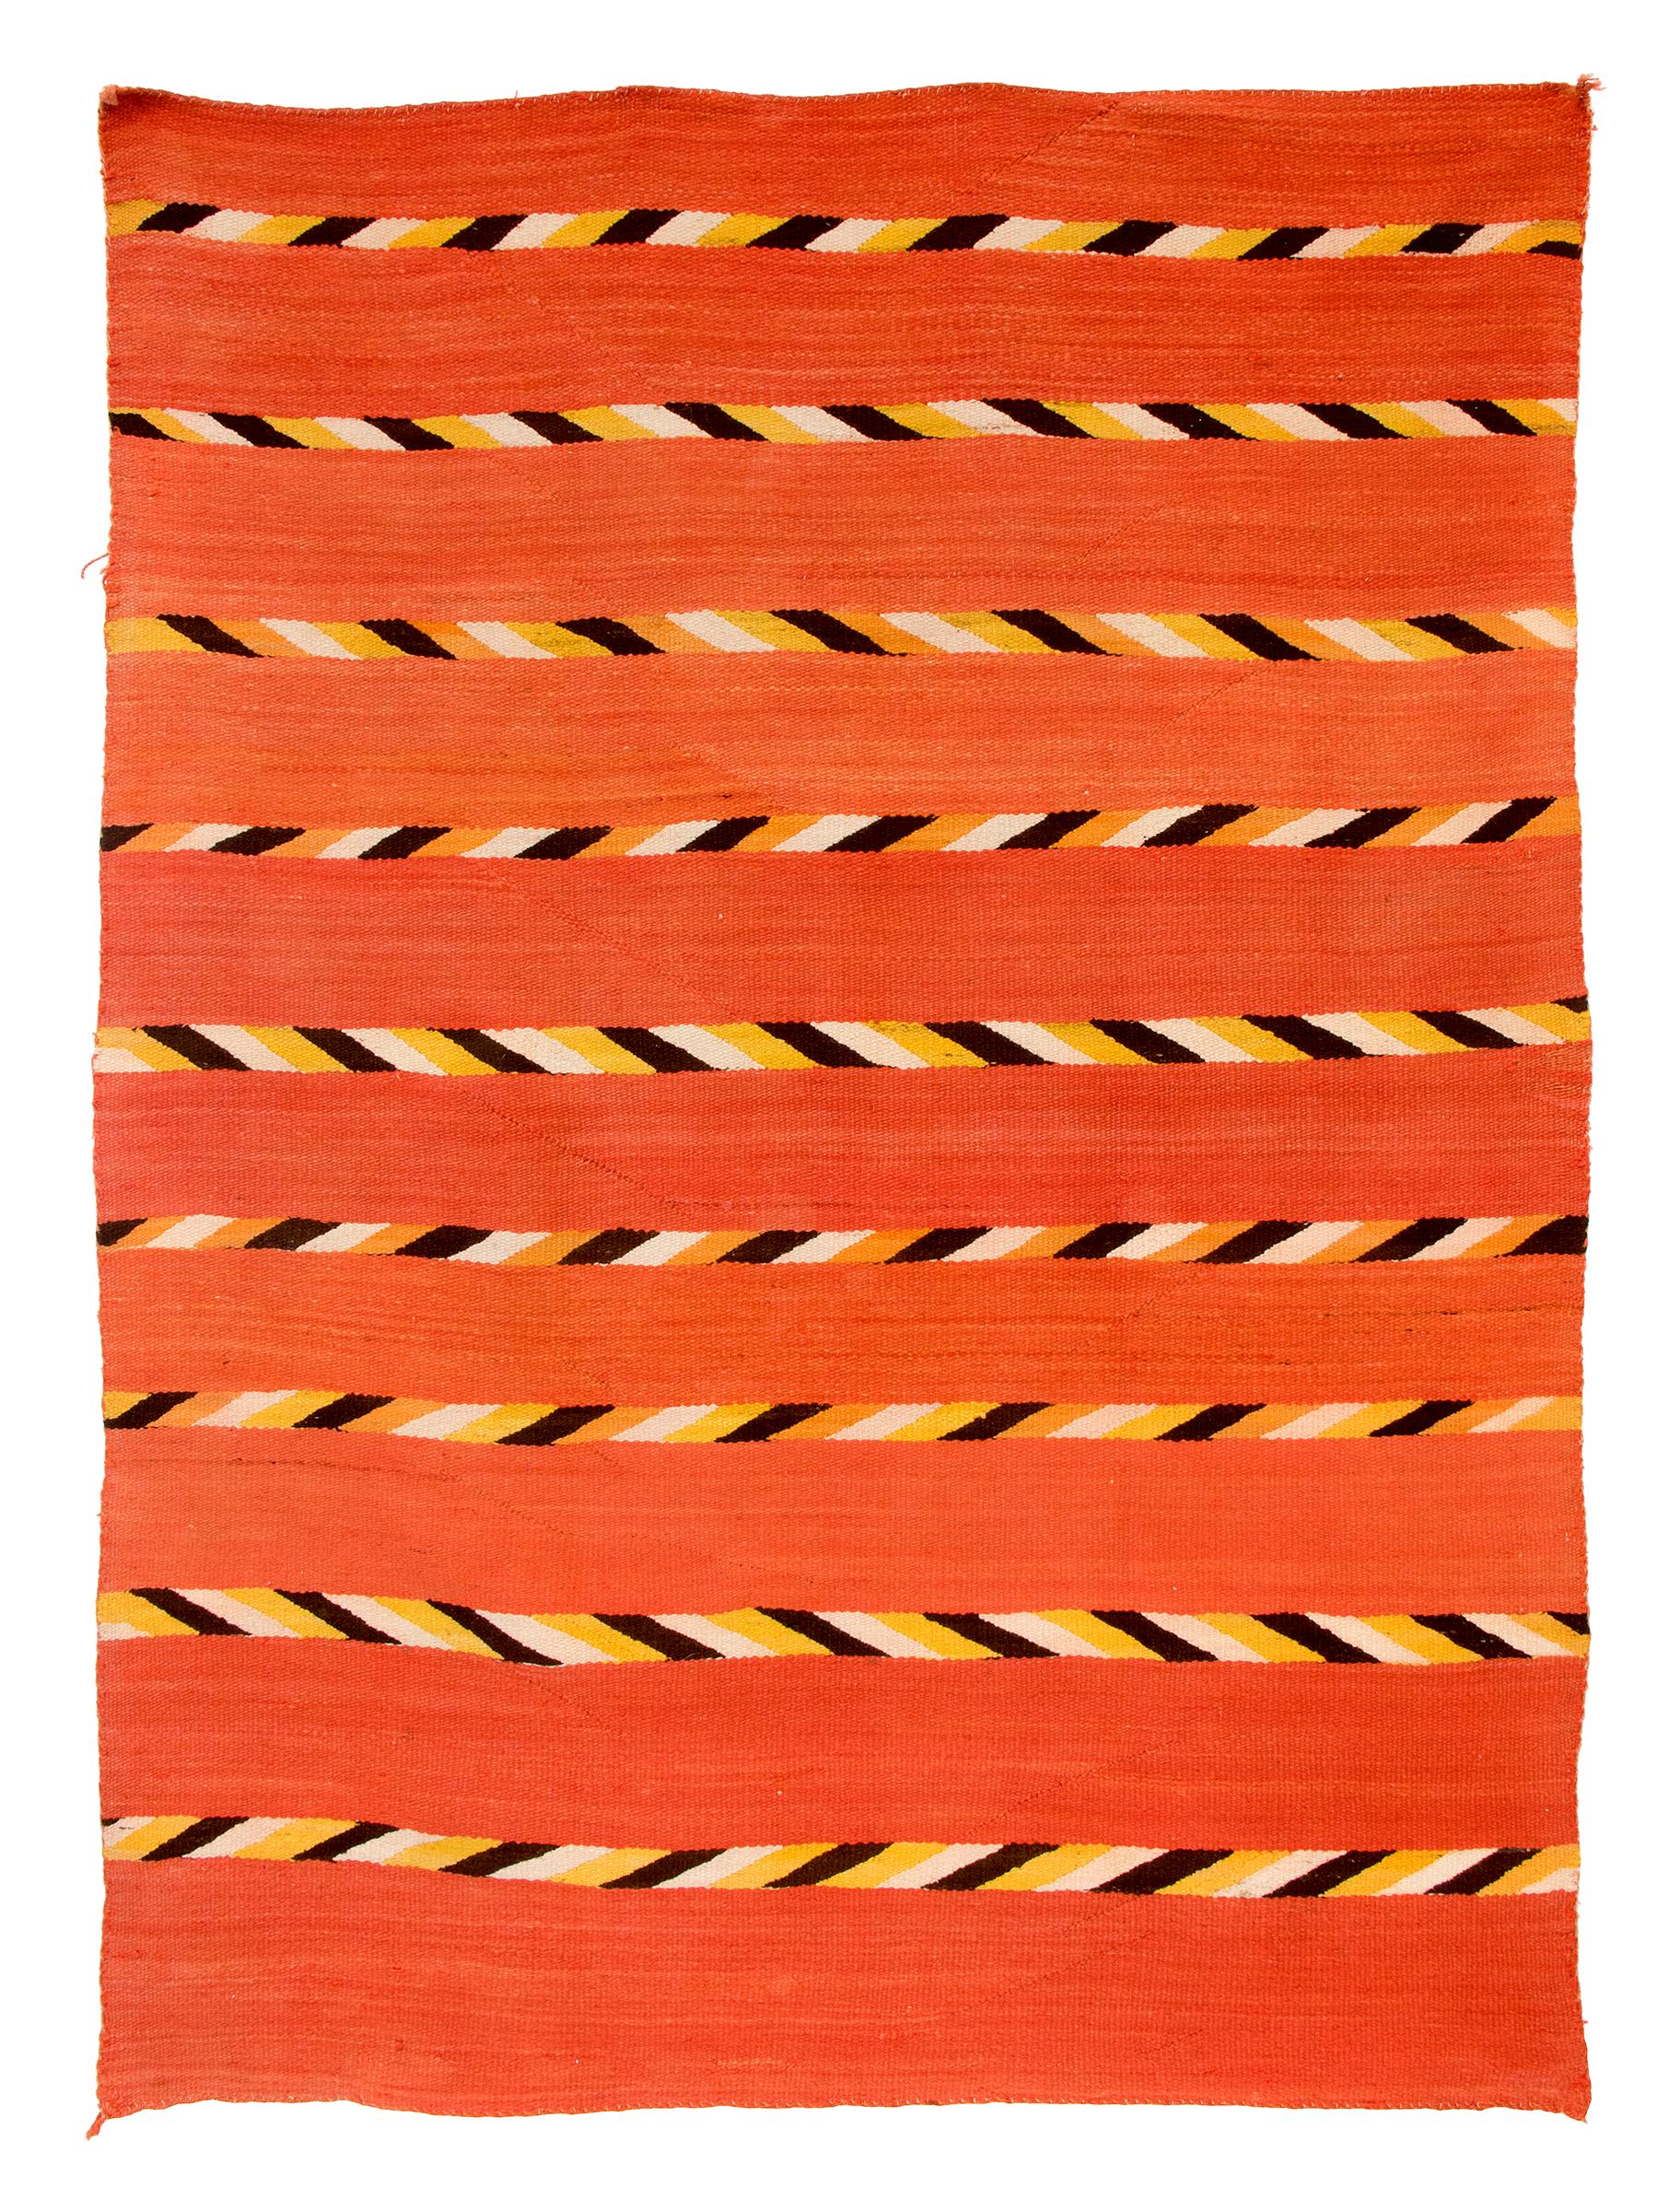 Antique 19th century Navajo textile, transitional blanket, circa 1880, finely woven of native hand spun wool in natural fleece colors of ivory and brown/black with aniline dyed orange and yellow in a banded design. Southwestern Native American